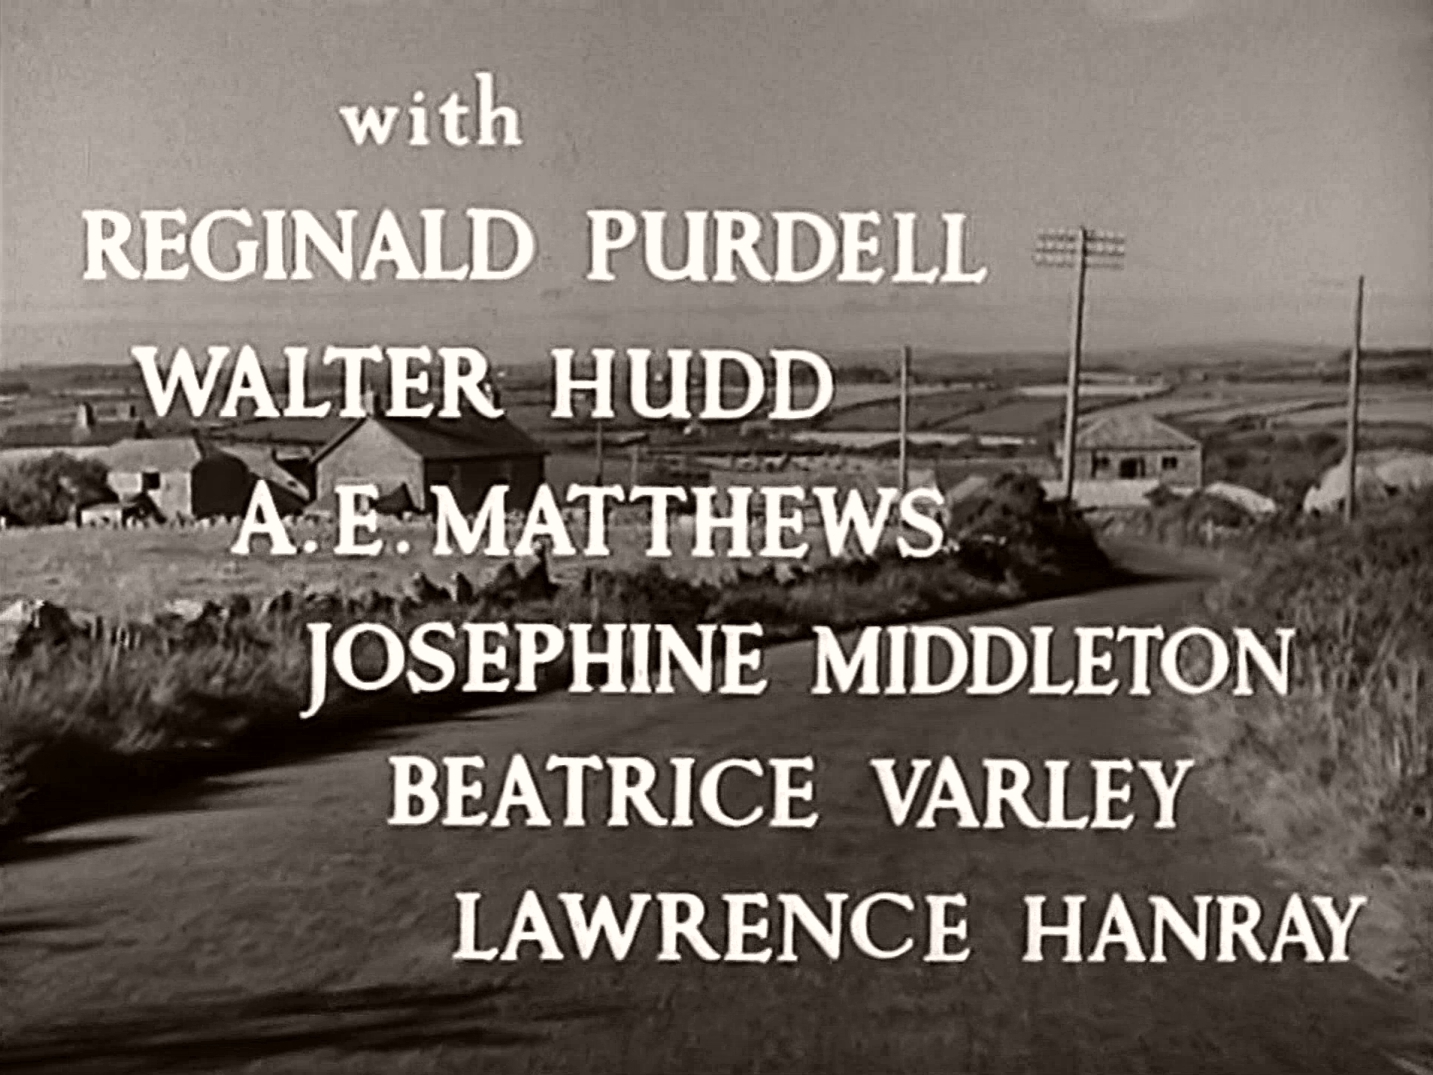 Main title from Love Story (1944) (5). With Reginald Purdell, Walter Hudd, Leslie Arliss, A E Matthews, Josephine Middleton, Beatrice Varley, Lawrence Hanray